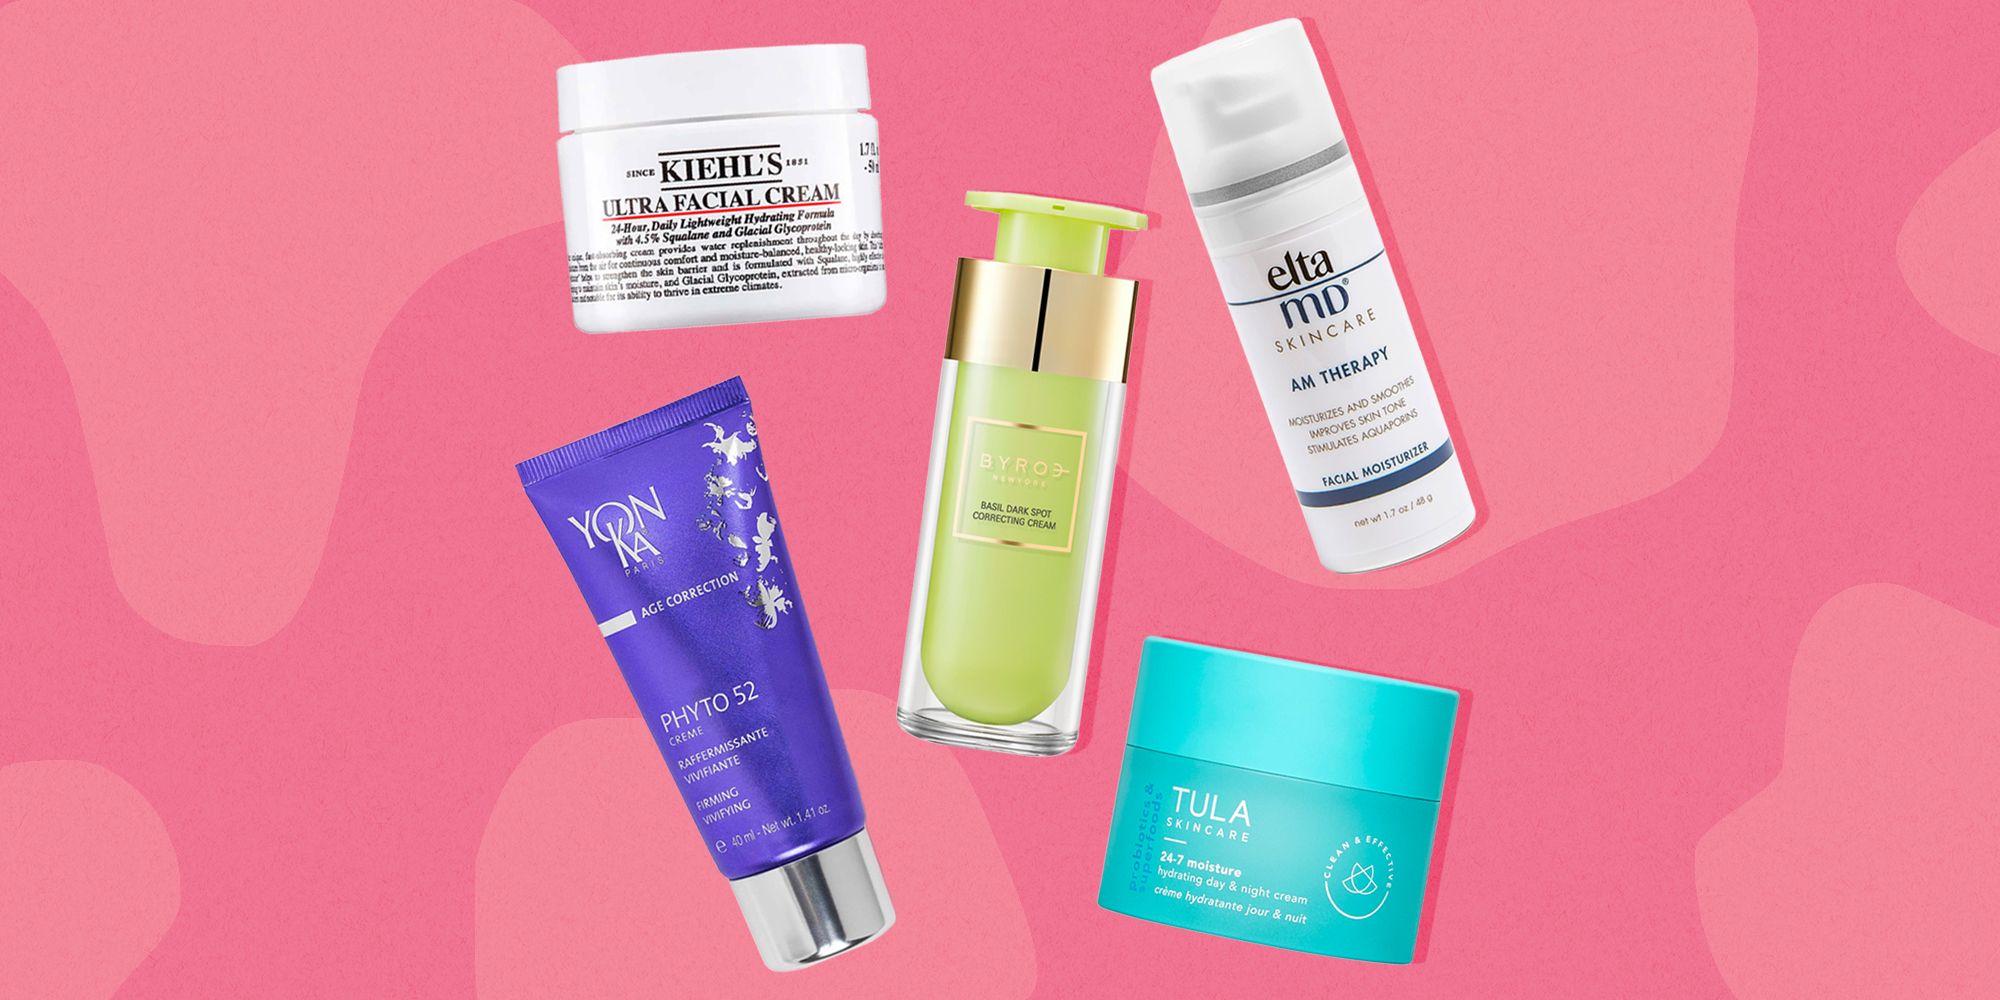 THE BEST WINTER MOISTURIZERS FOR DRY, SENSITIVE SKIN